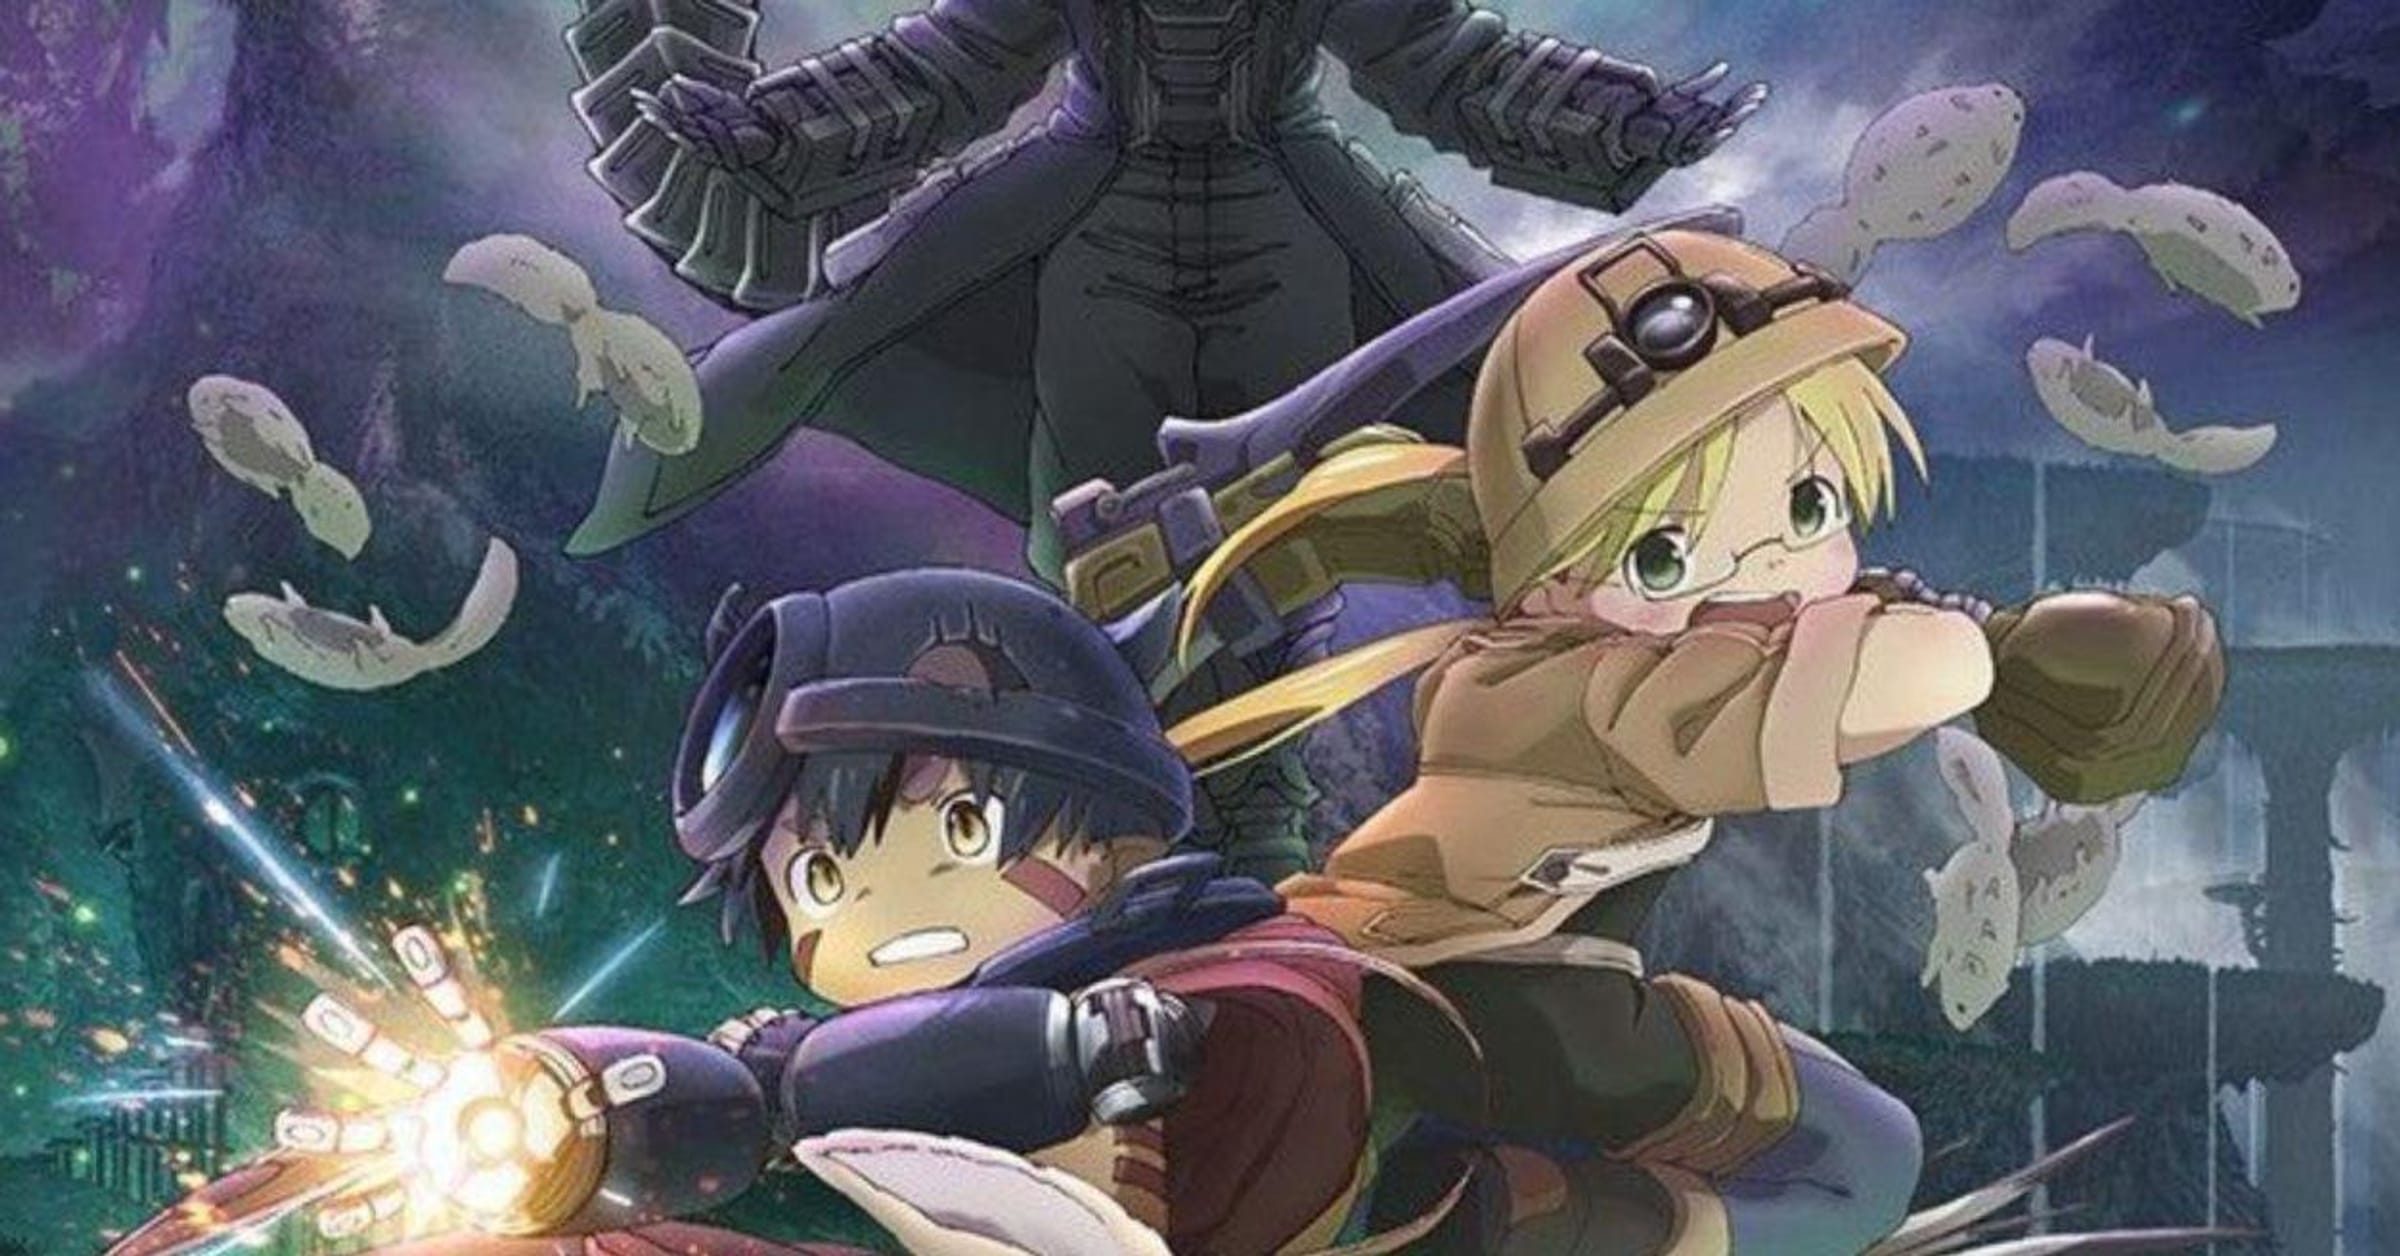 The Importance of Made in Abyss winning Anime of the Year for the